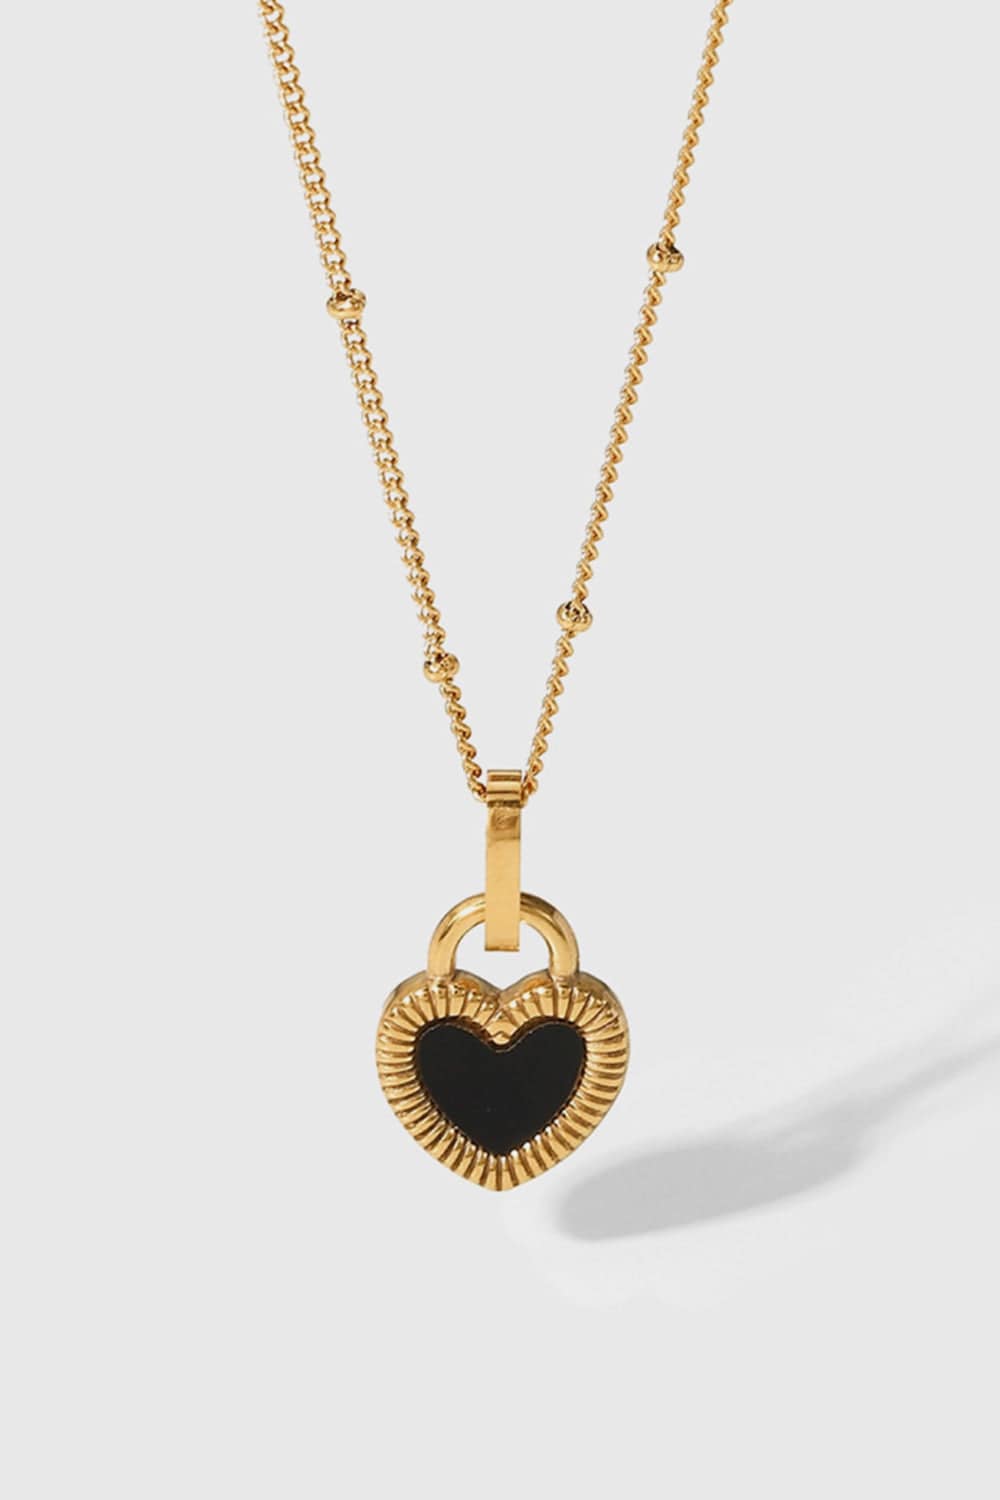 Heart's Delight - Let love shine through you with our Contrast Heart Pendant Necklace - Express your deepest feelings in a timeless way. - Guy Christopher